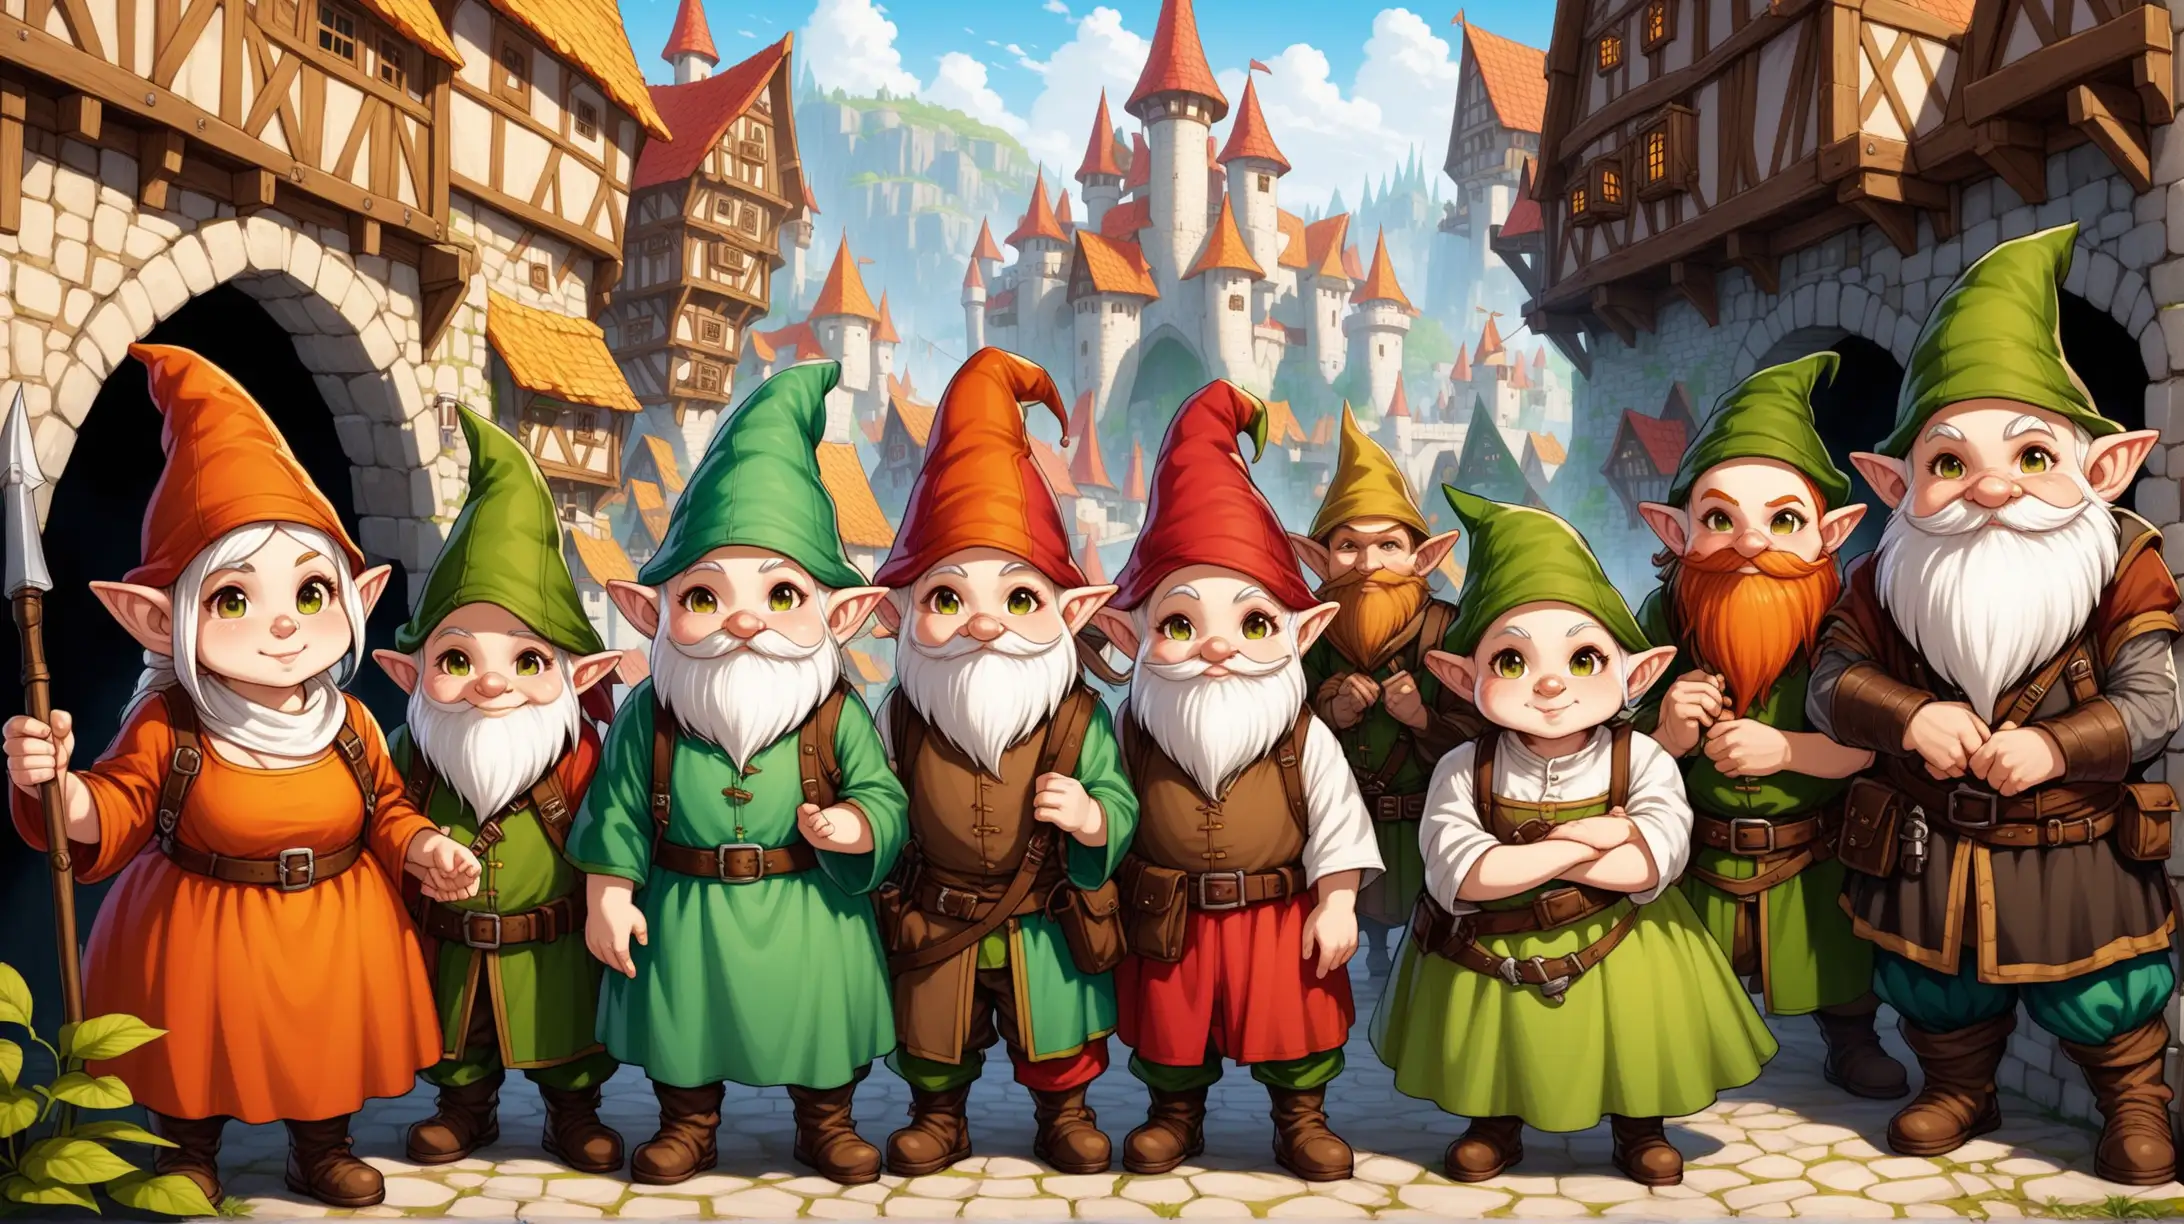 Medieval Fantasy Gnome City with Young Fair Skin Gnomes and Rogues